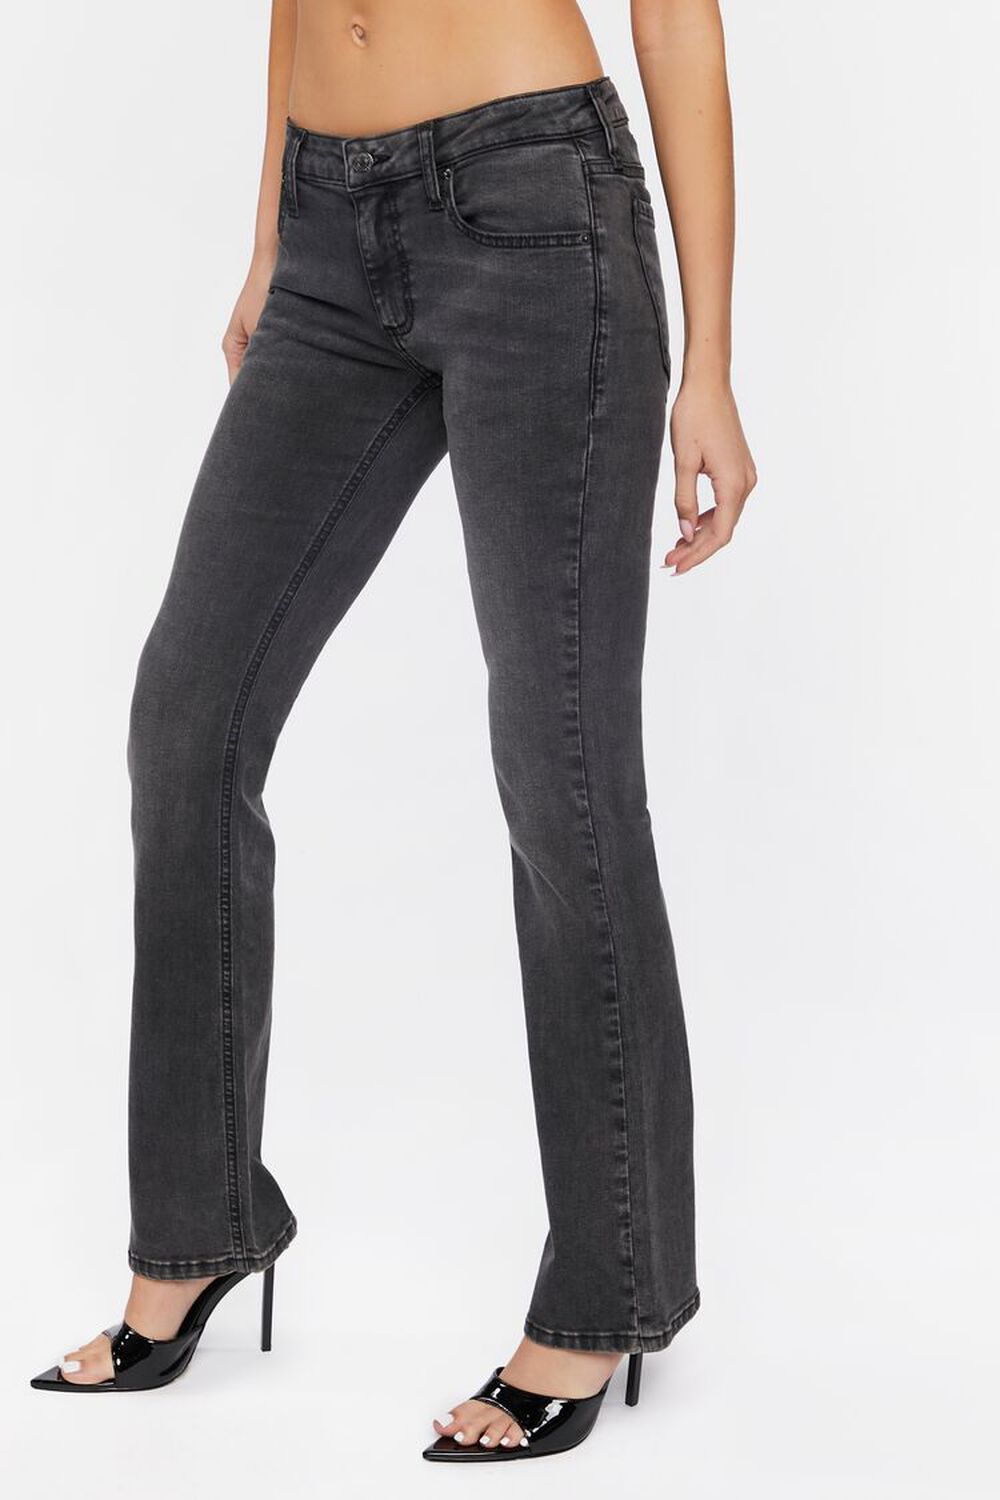 WASHED BLACK Low-Rise Bootcut Jeans, image 3